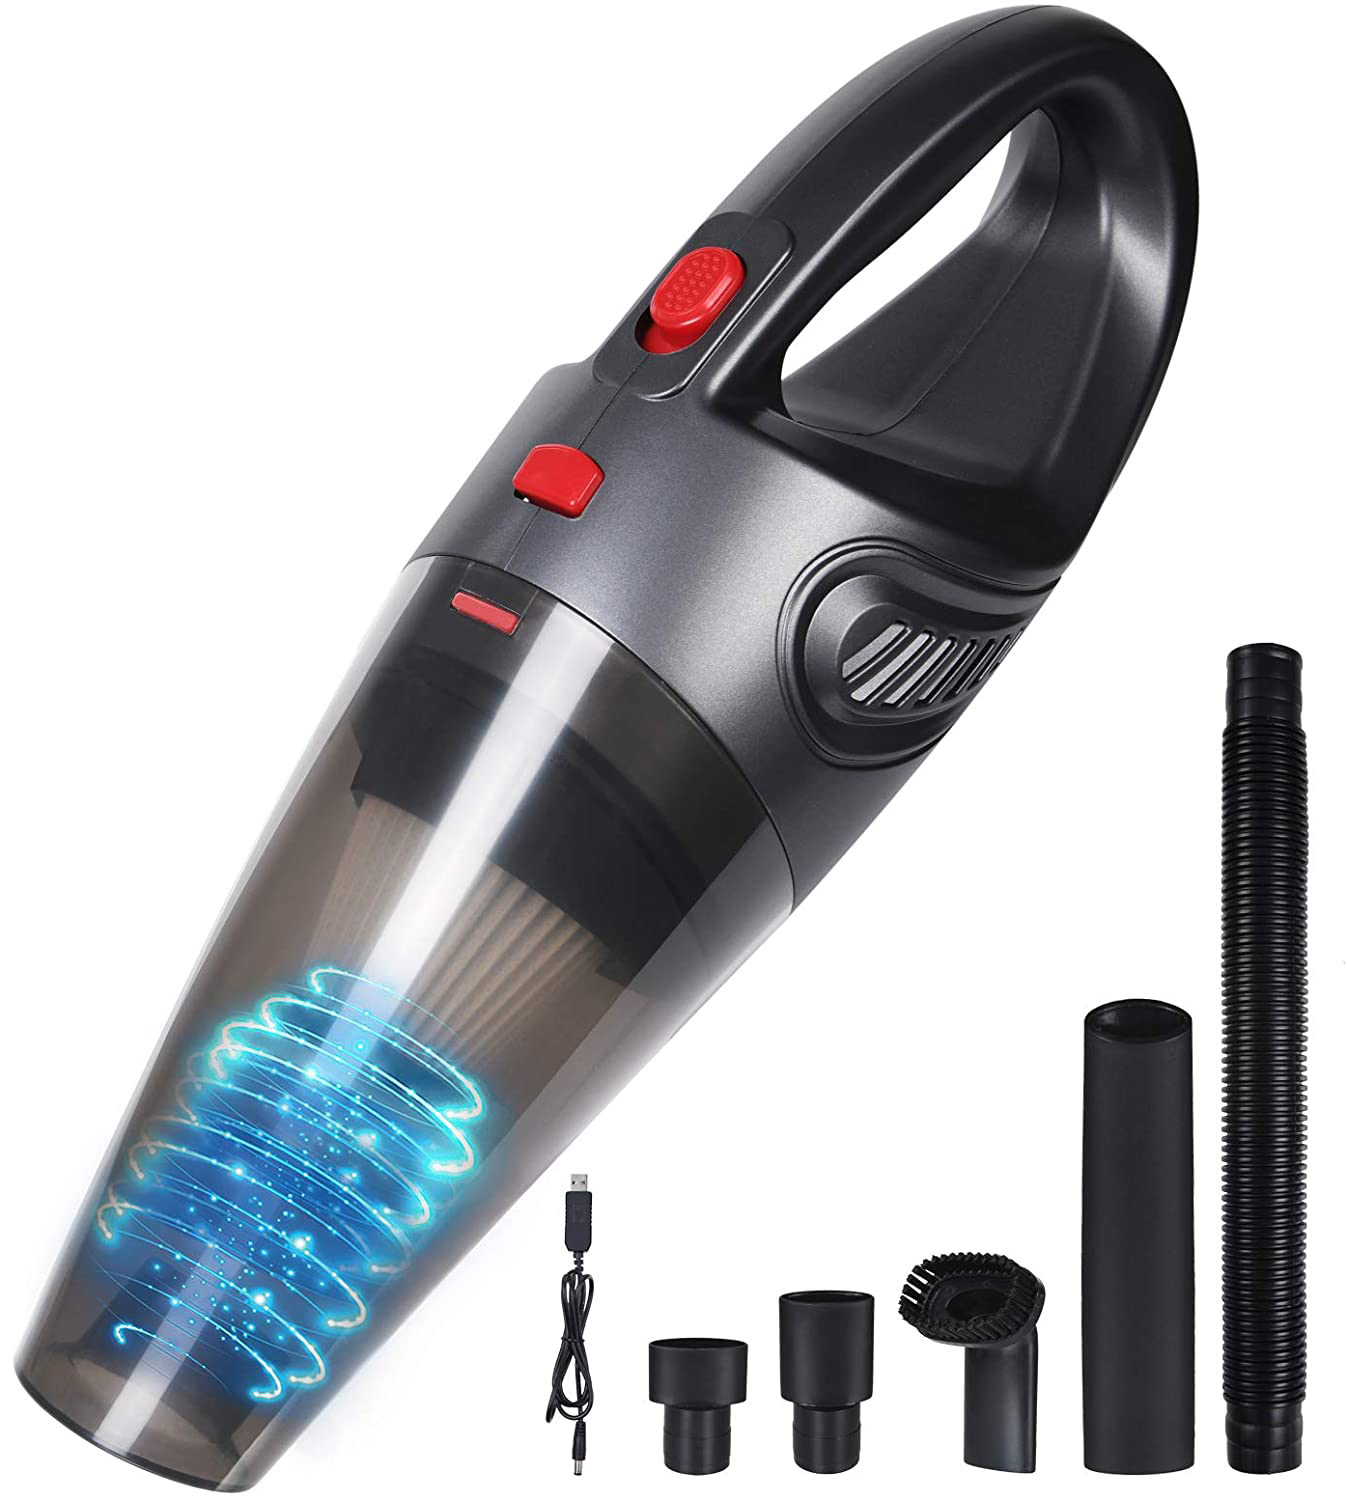 Powerful Car Vacuum Cleaner Wet/Dry Cordless Strong Suction Handheld